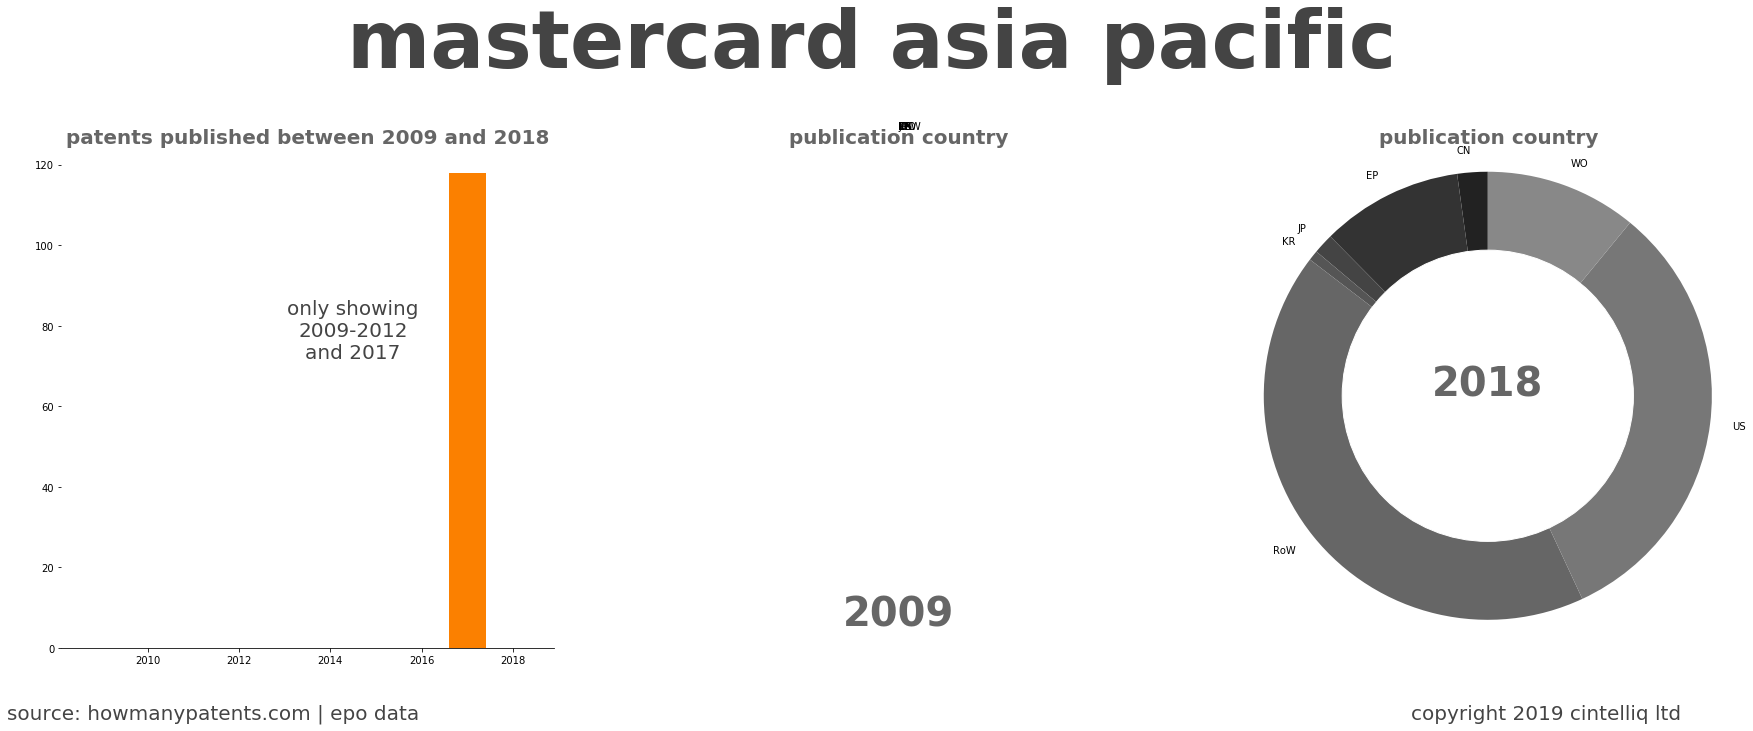 summary of patents for Mastercard Asia Pacific